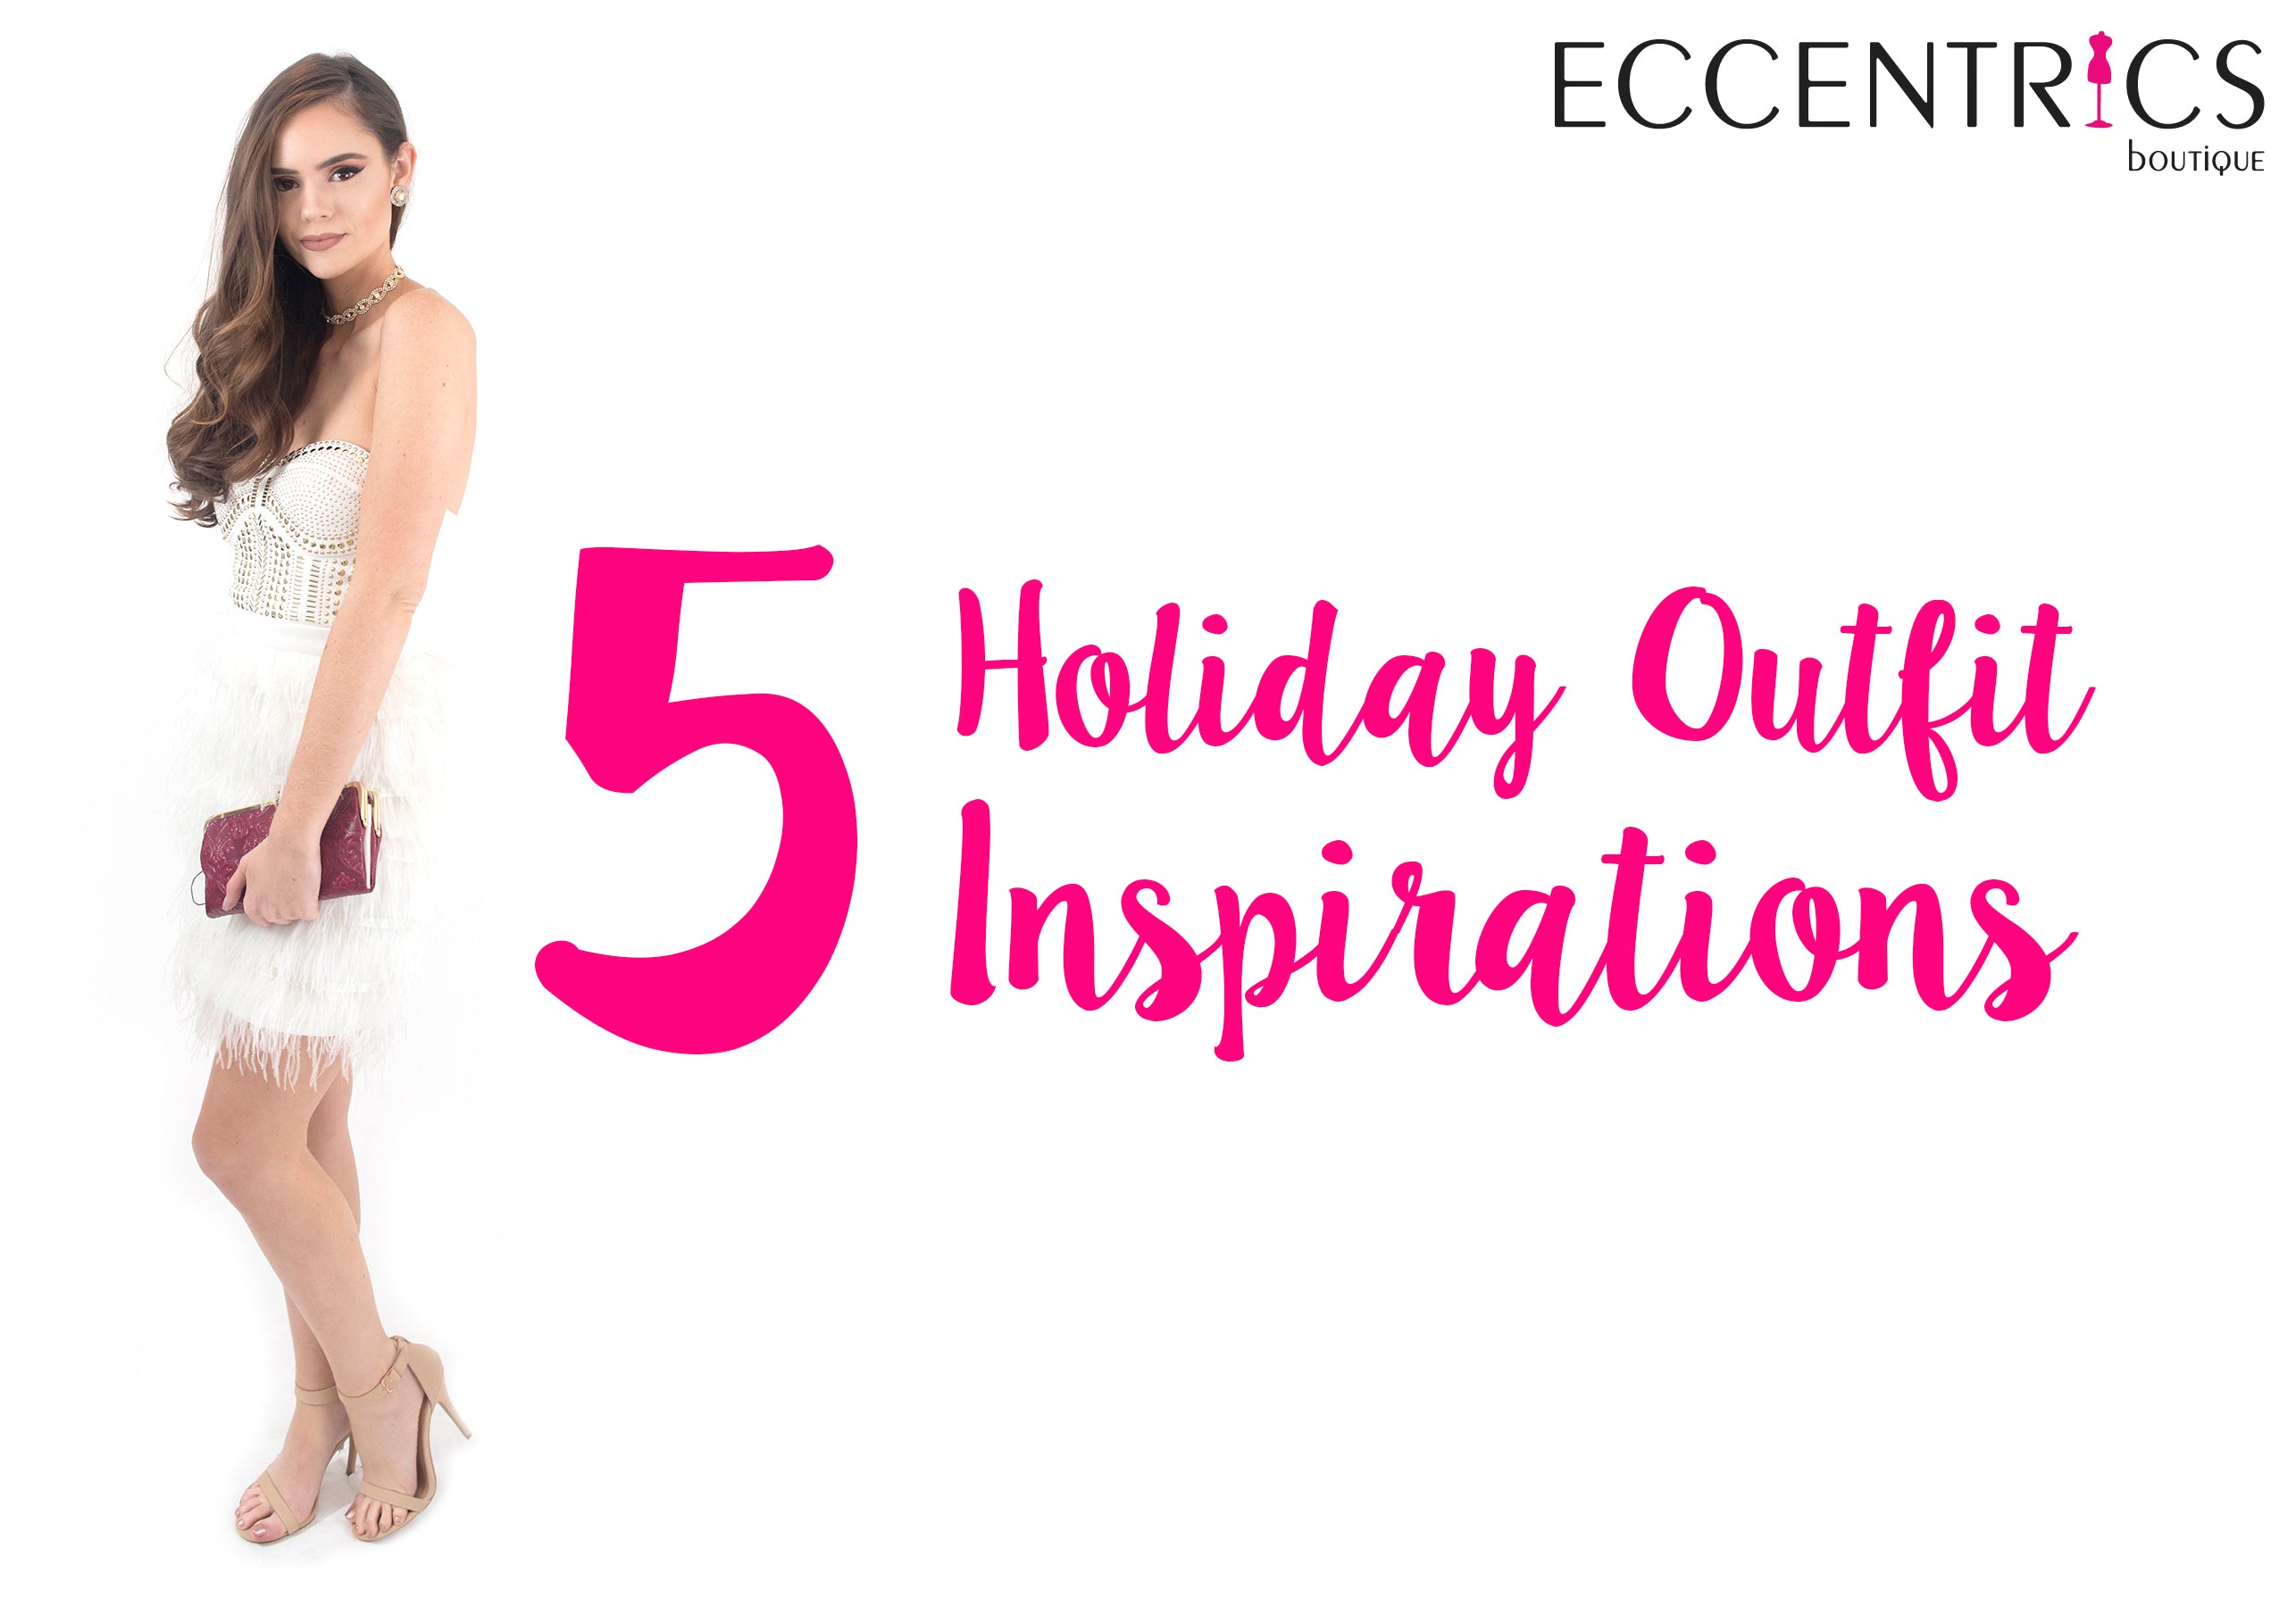 5 holiday outfit inspirations at Eccentrics Boutique